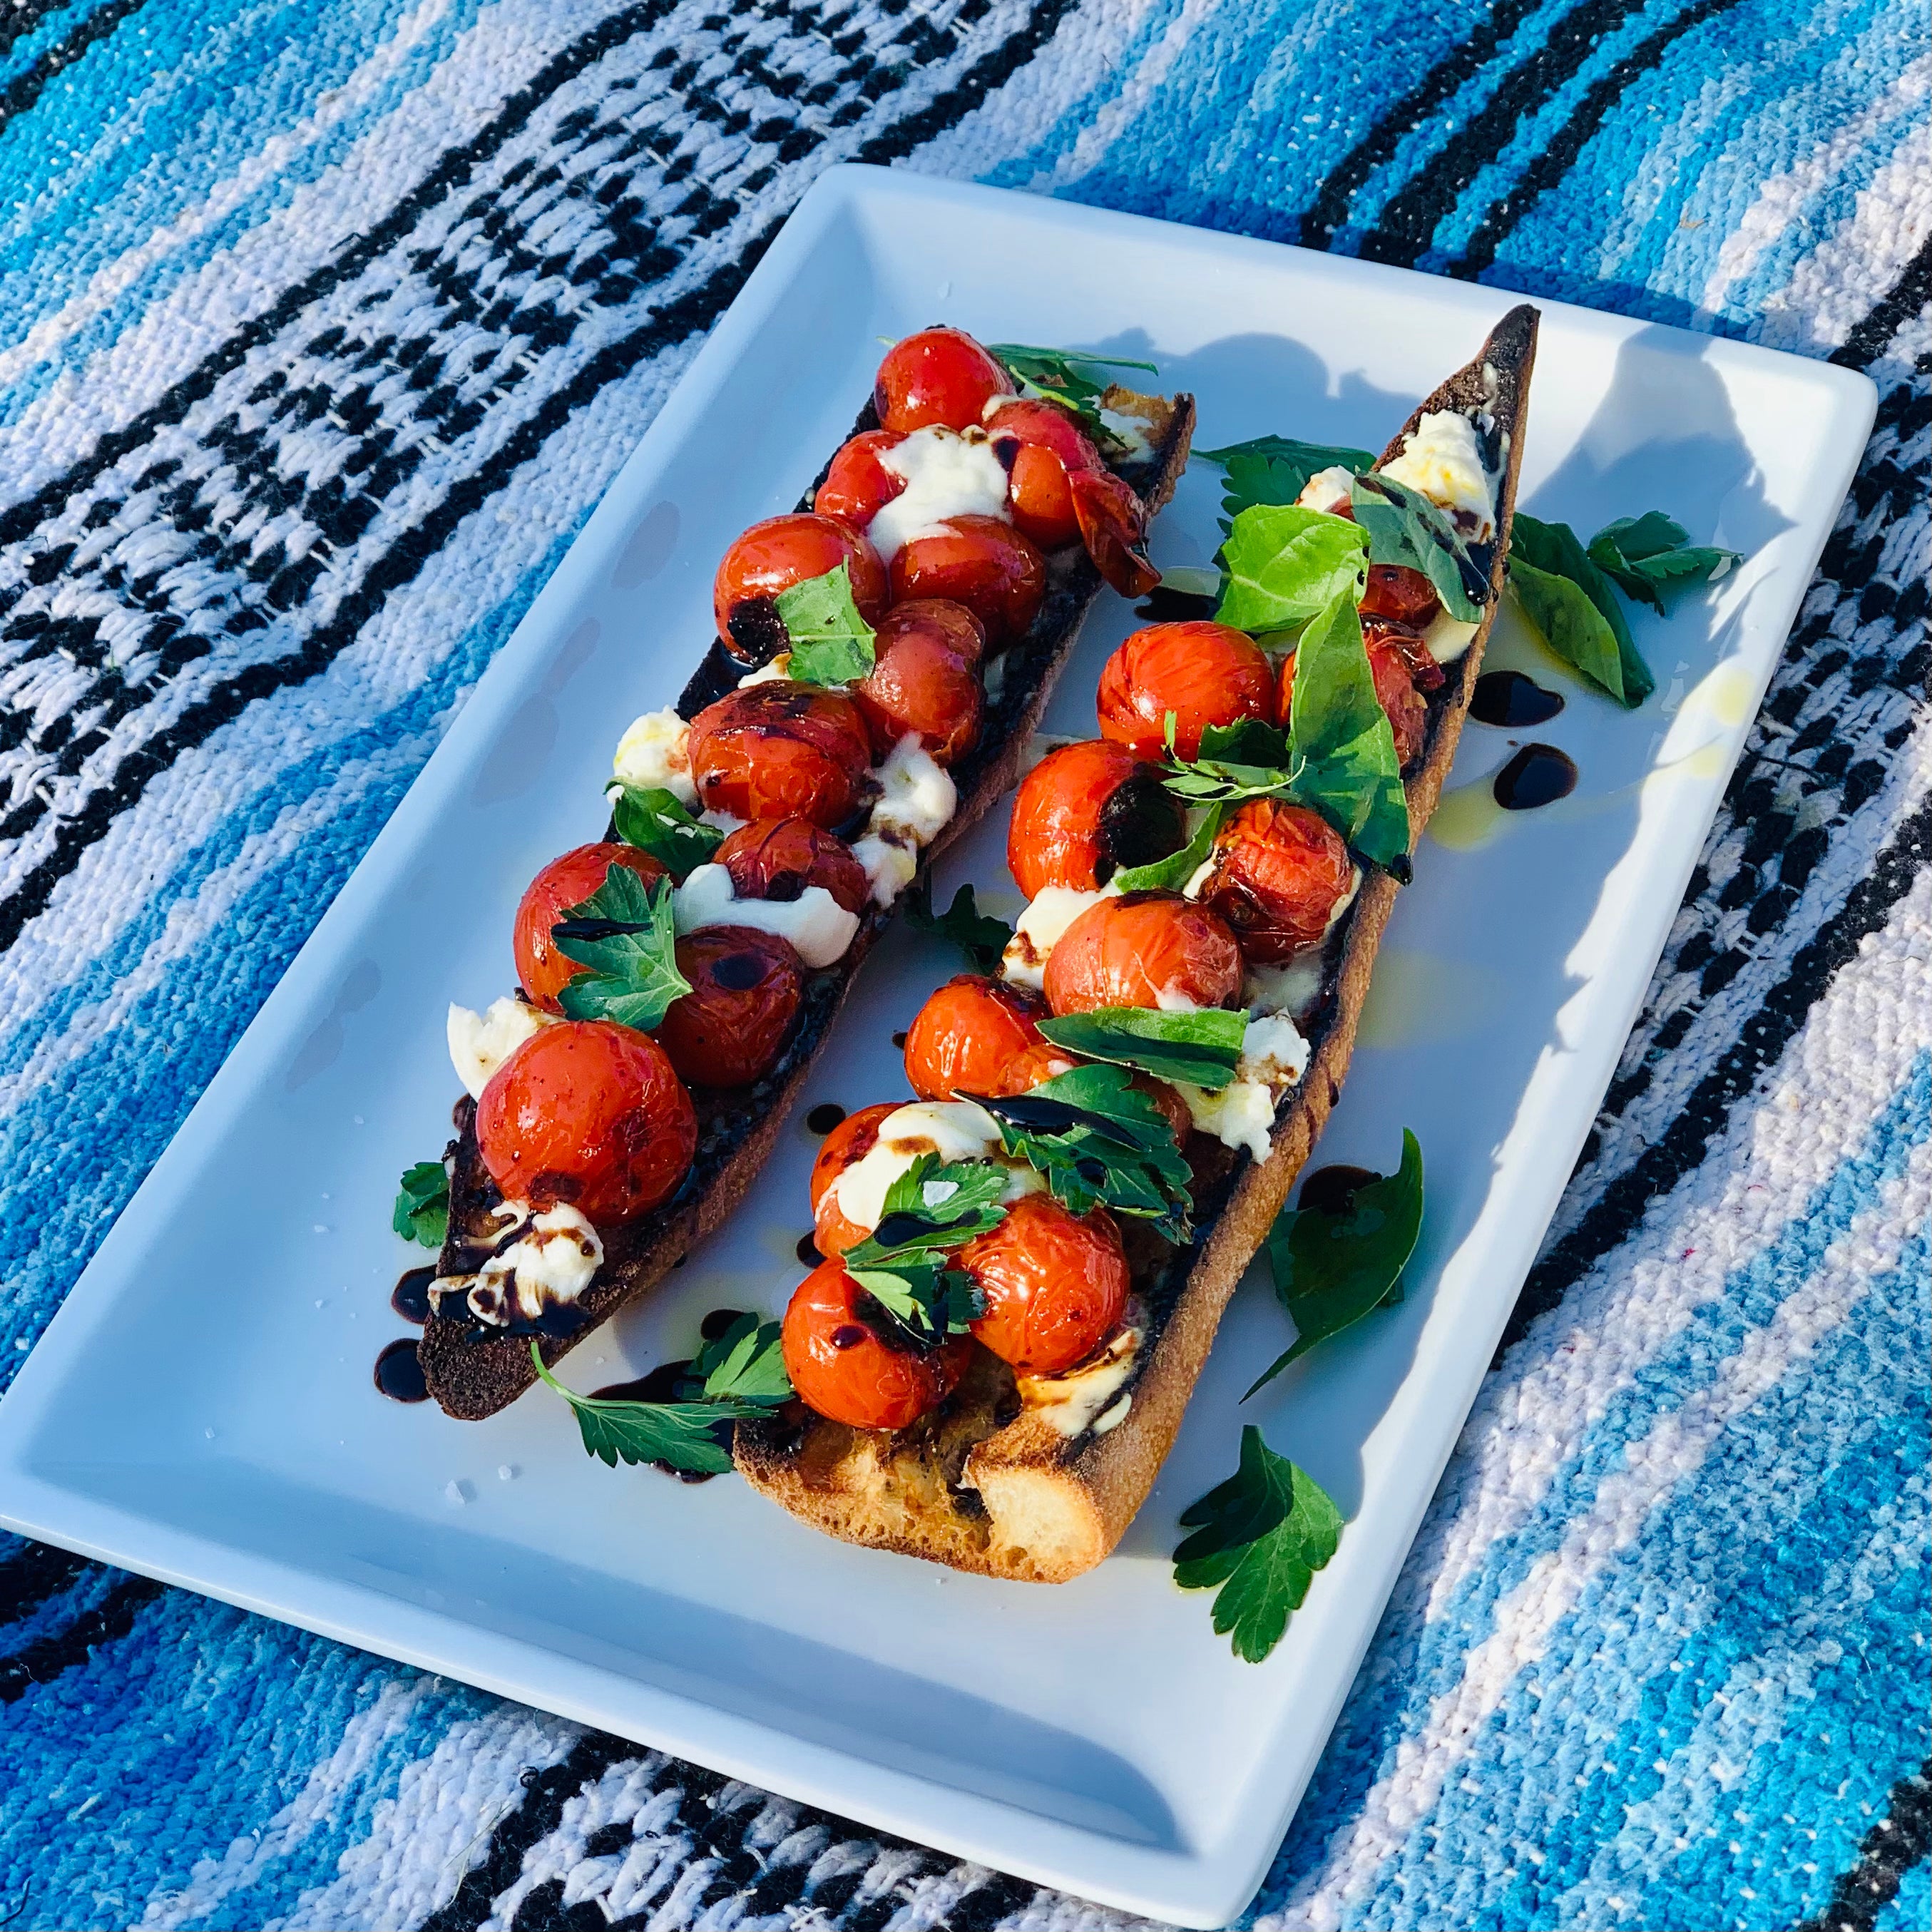 Charred Caprese Open-Faced Sandwich with Basil & Aged Balsamic Dressing